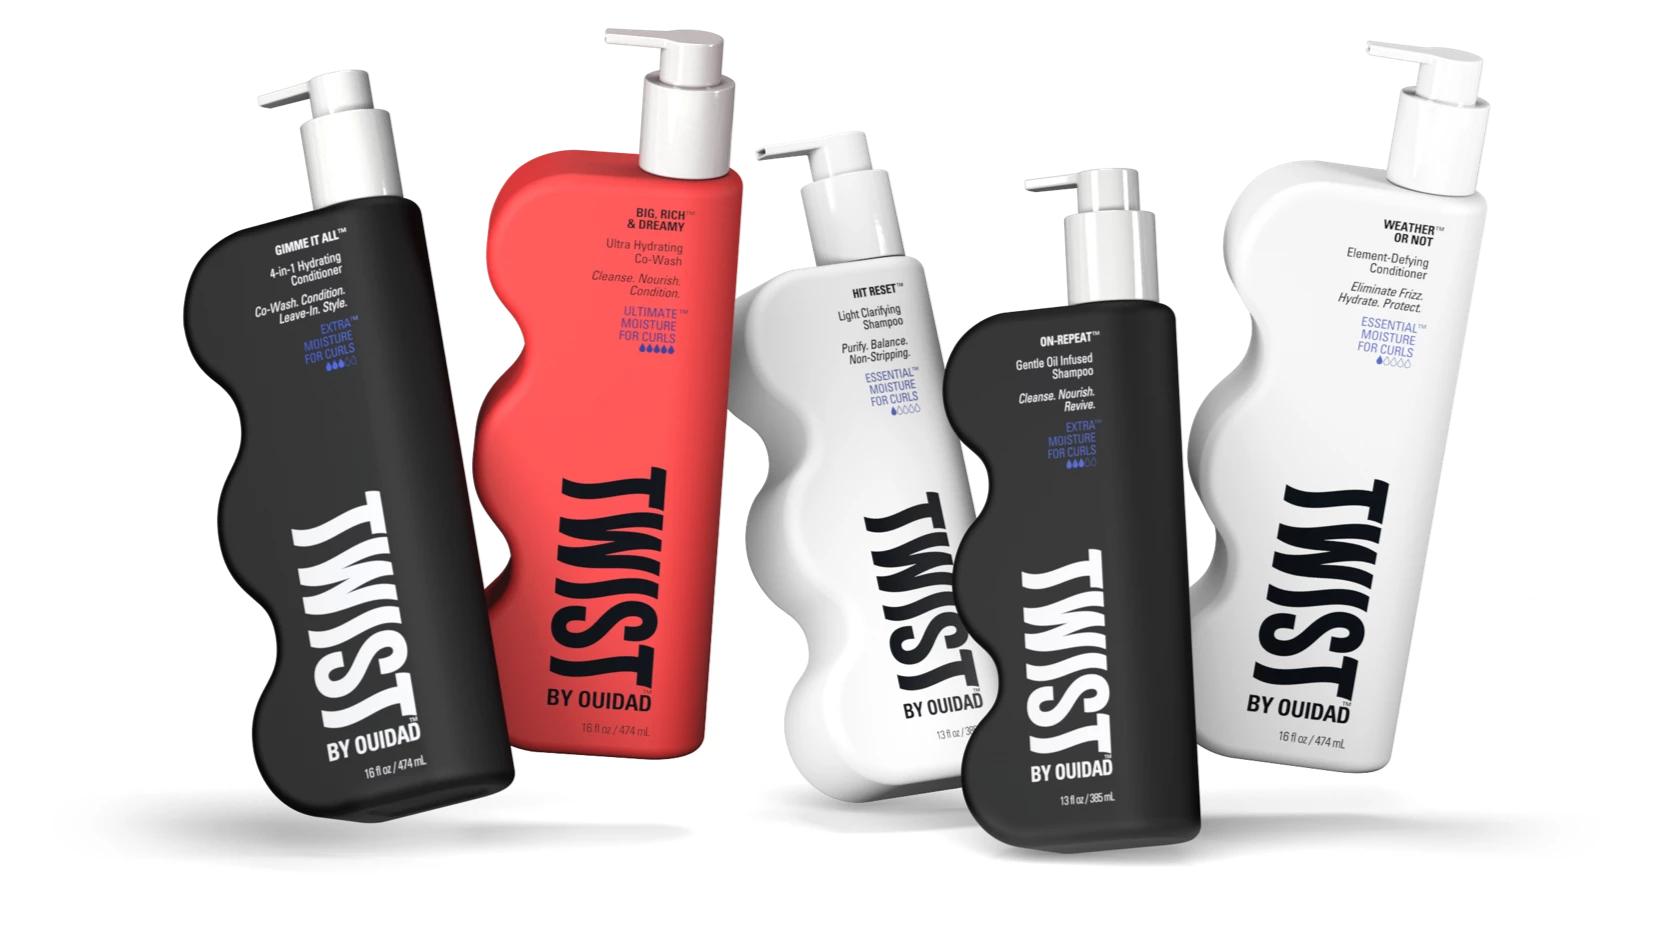 Twist Hair - ALL MONTH IS 60% OFF